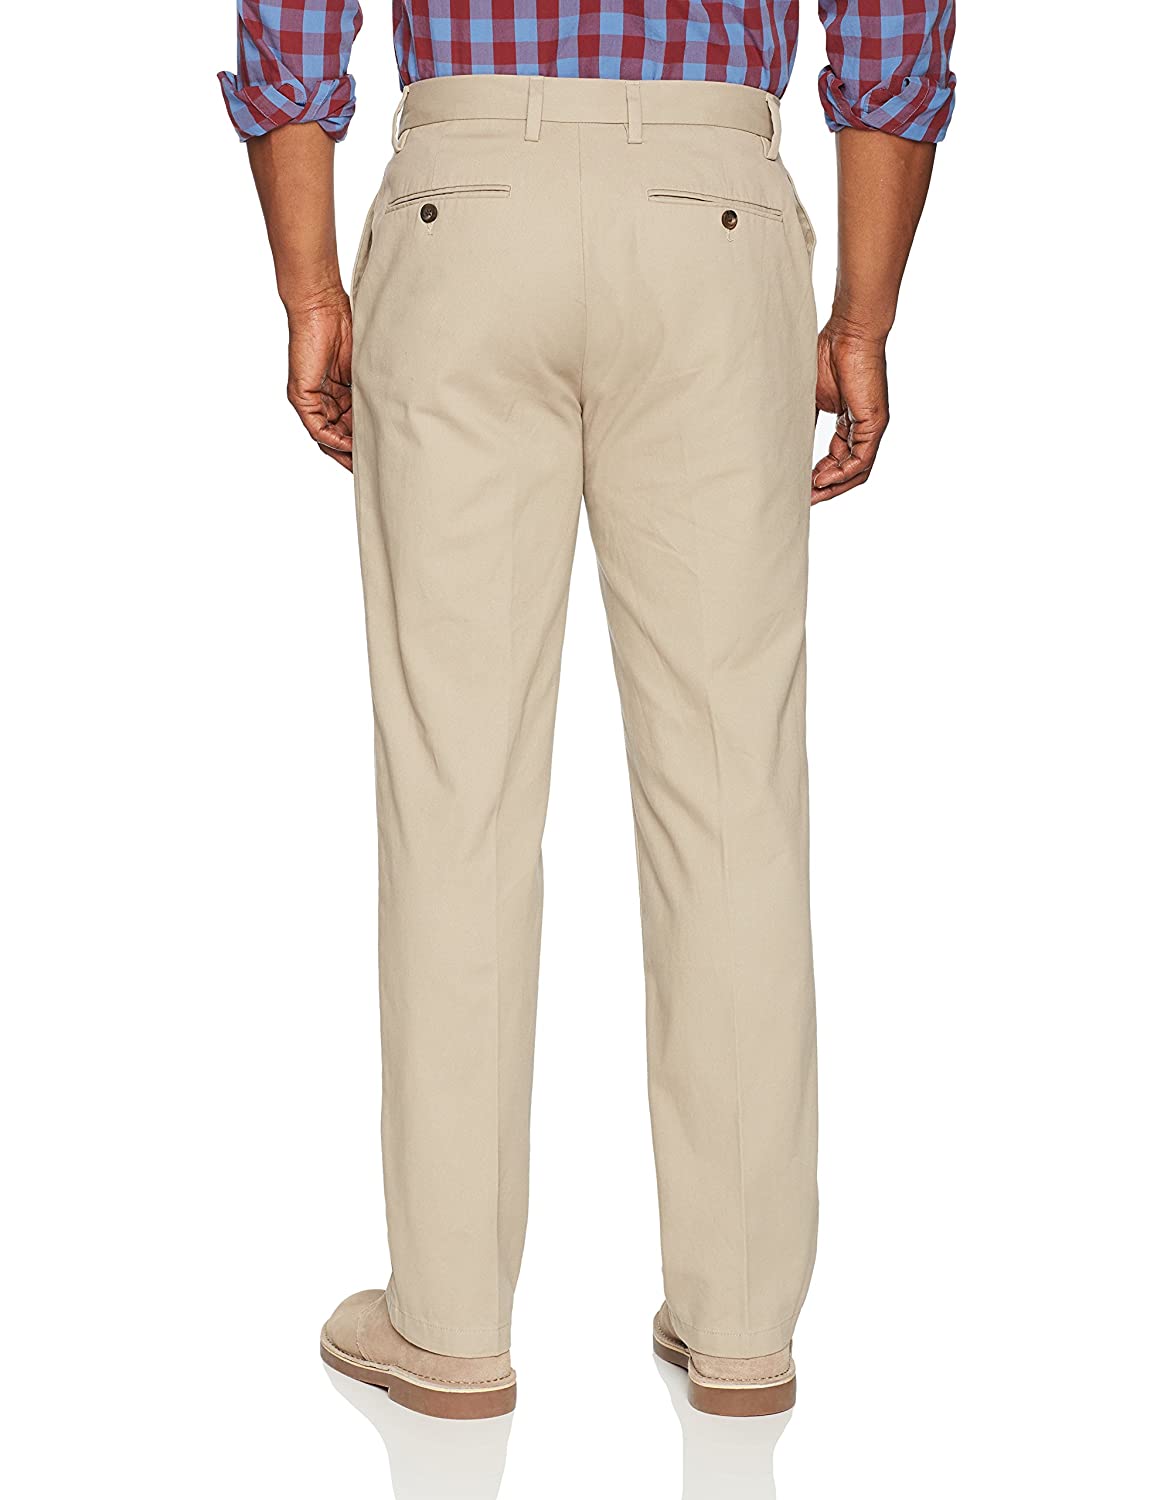 Essentials Men's Classic-Fit Wrinkle-Resistant Flat-Front Chino Pant ...